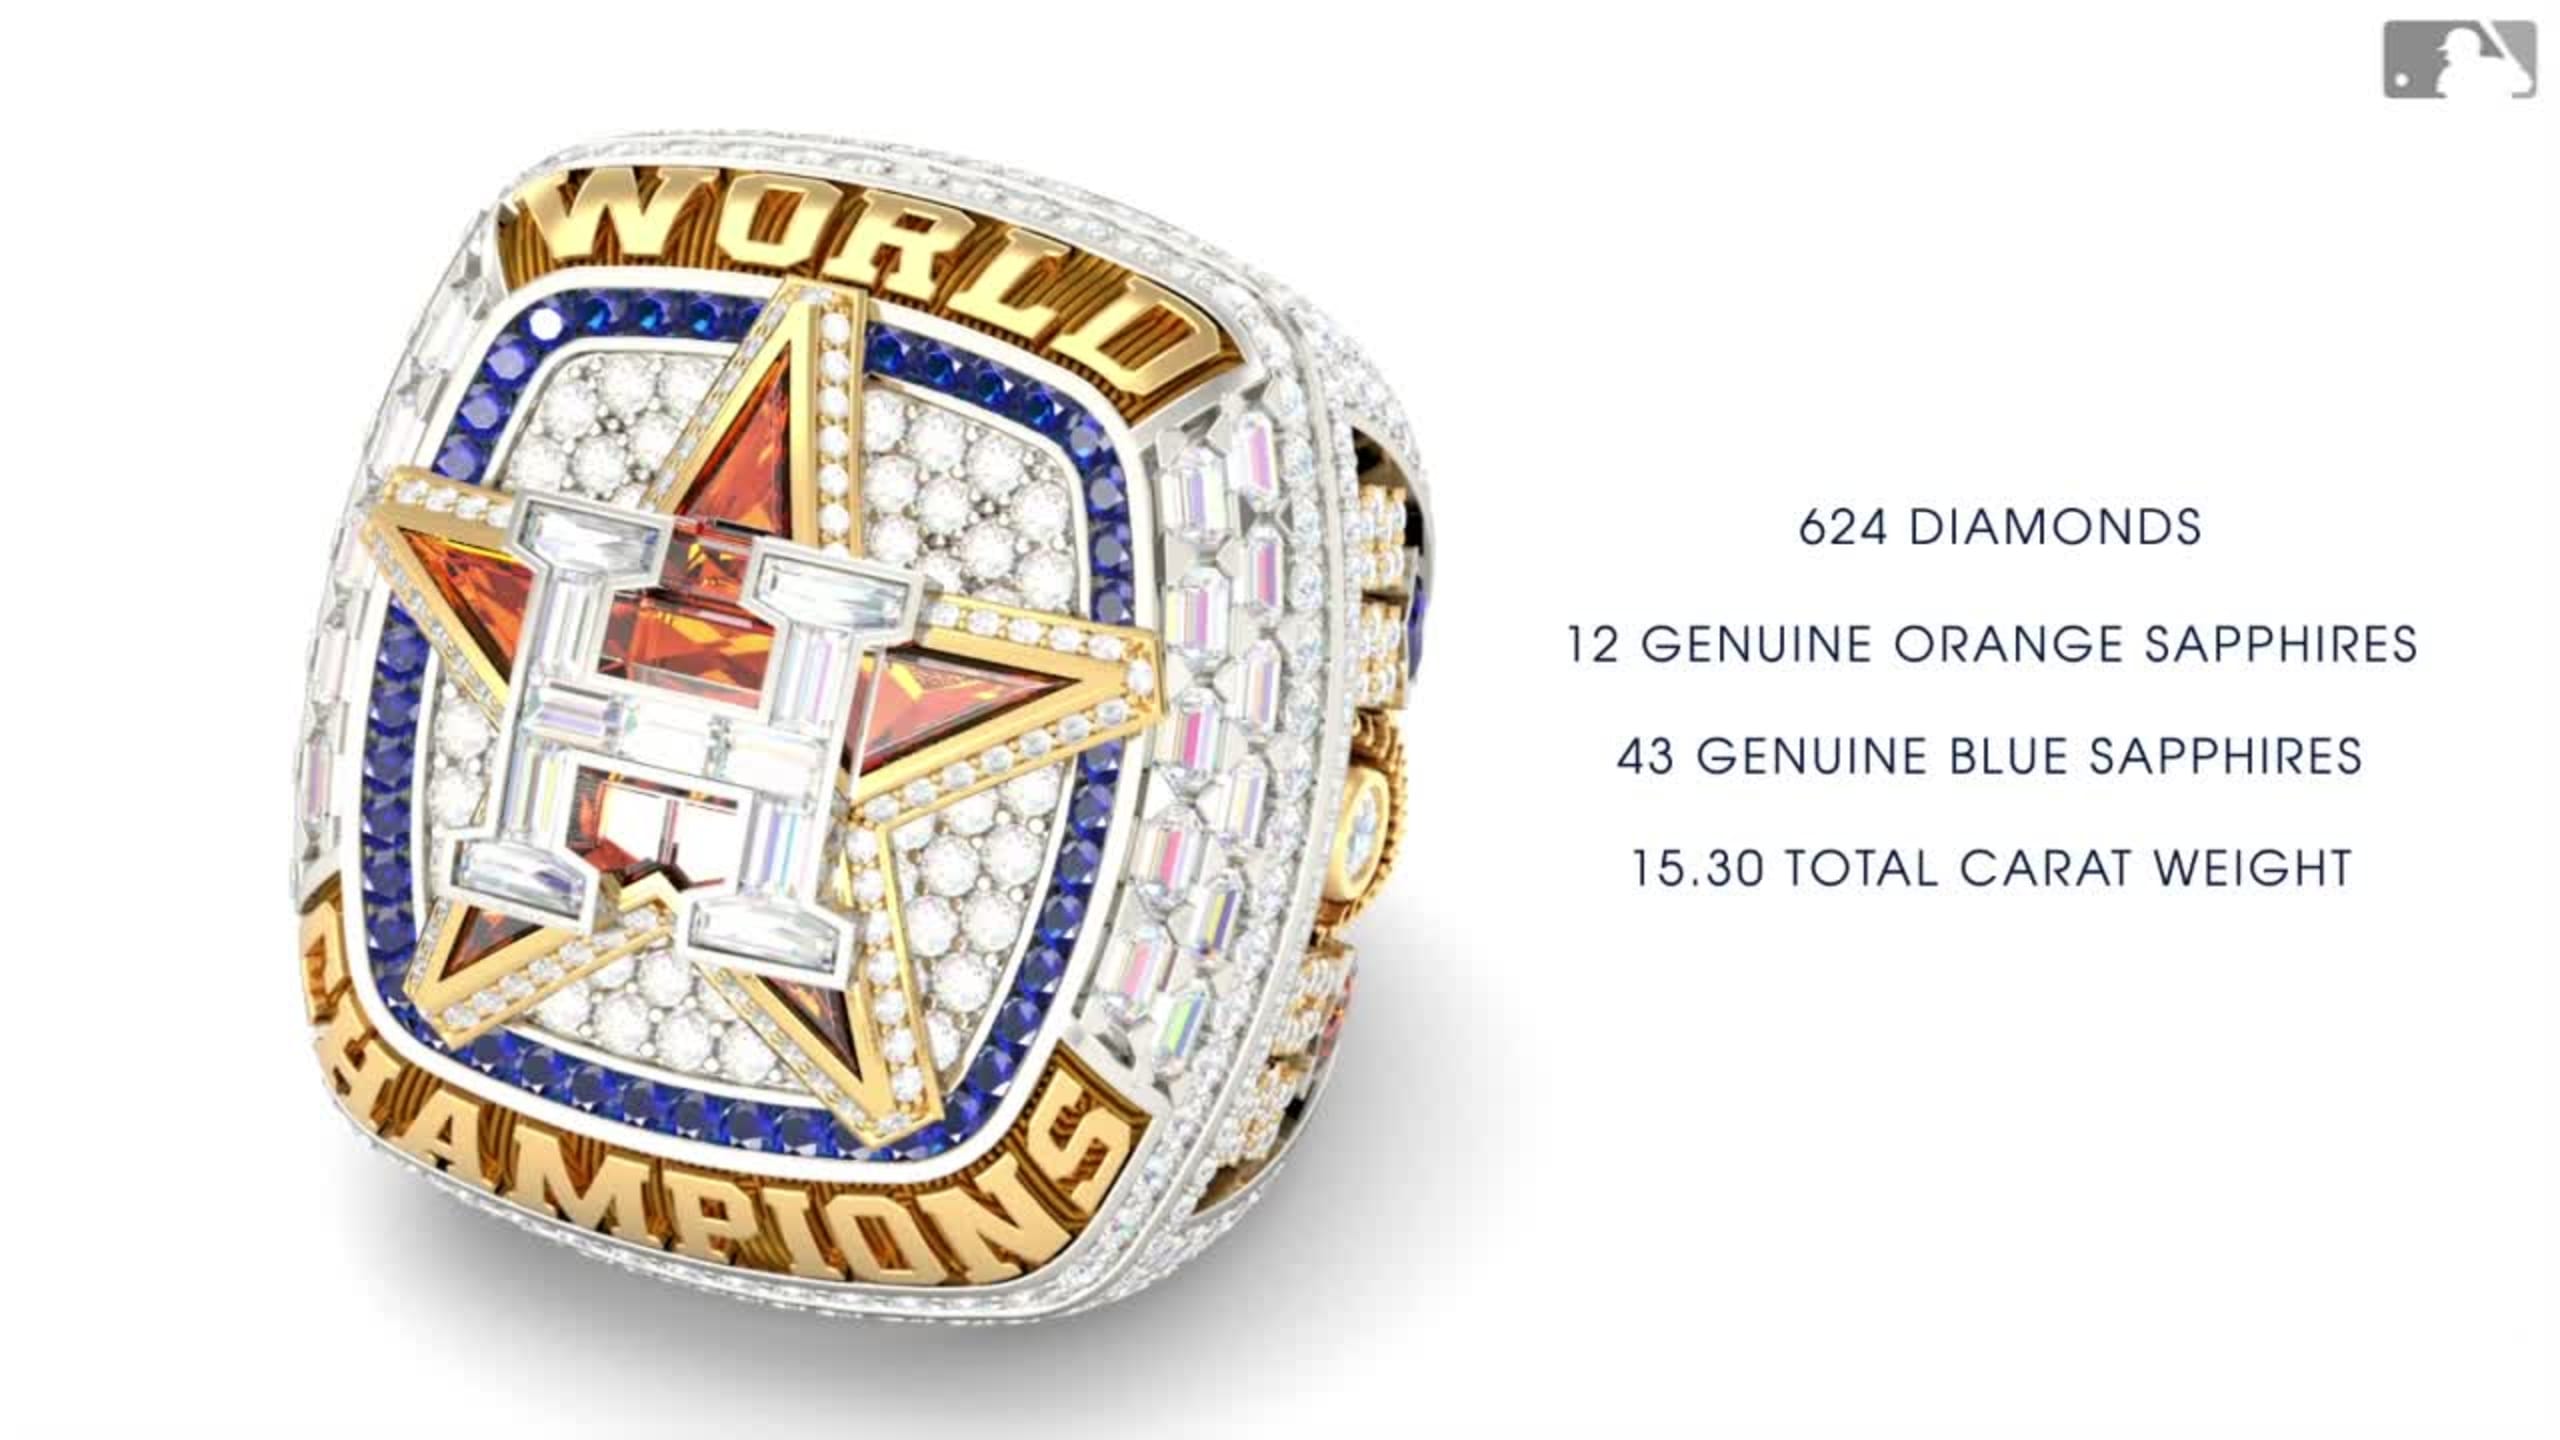 Want a 2022 Astros World Championship ring? Here's your chance